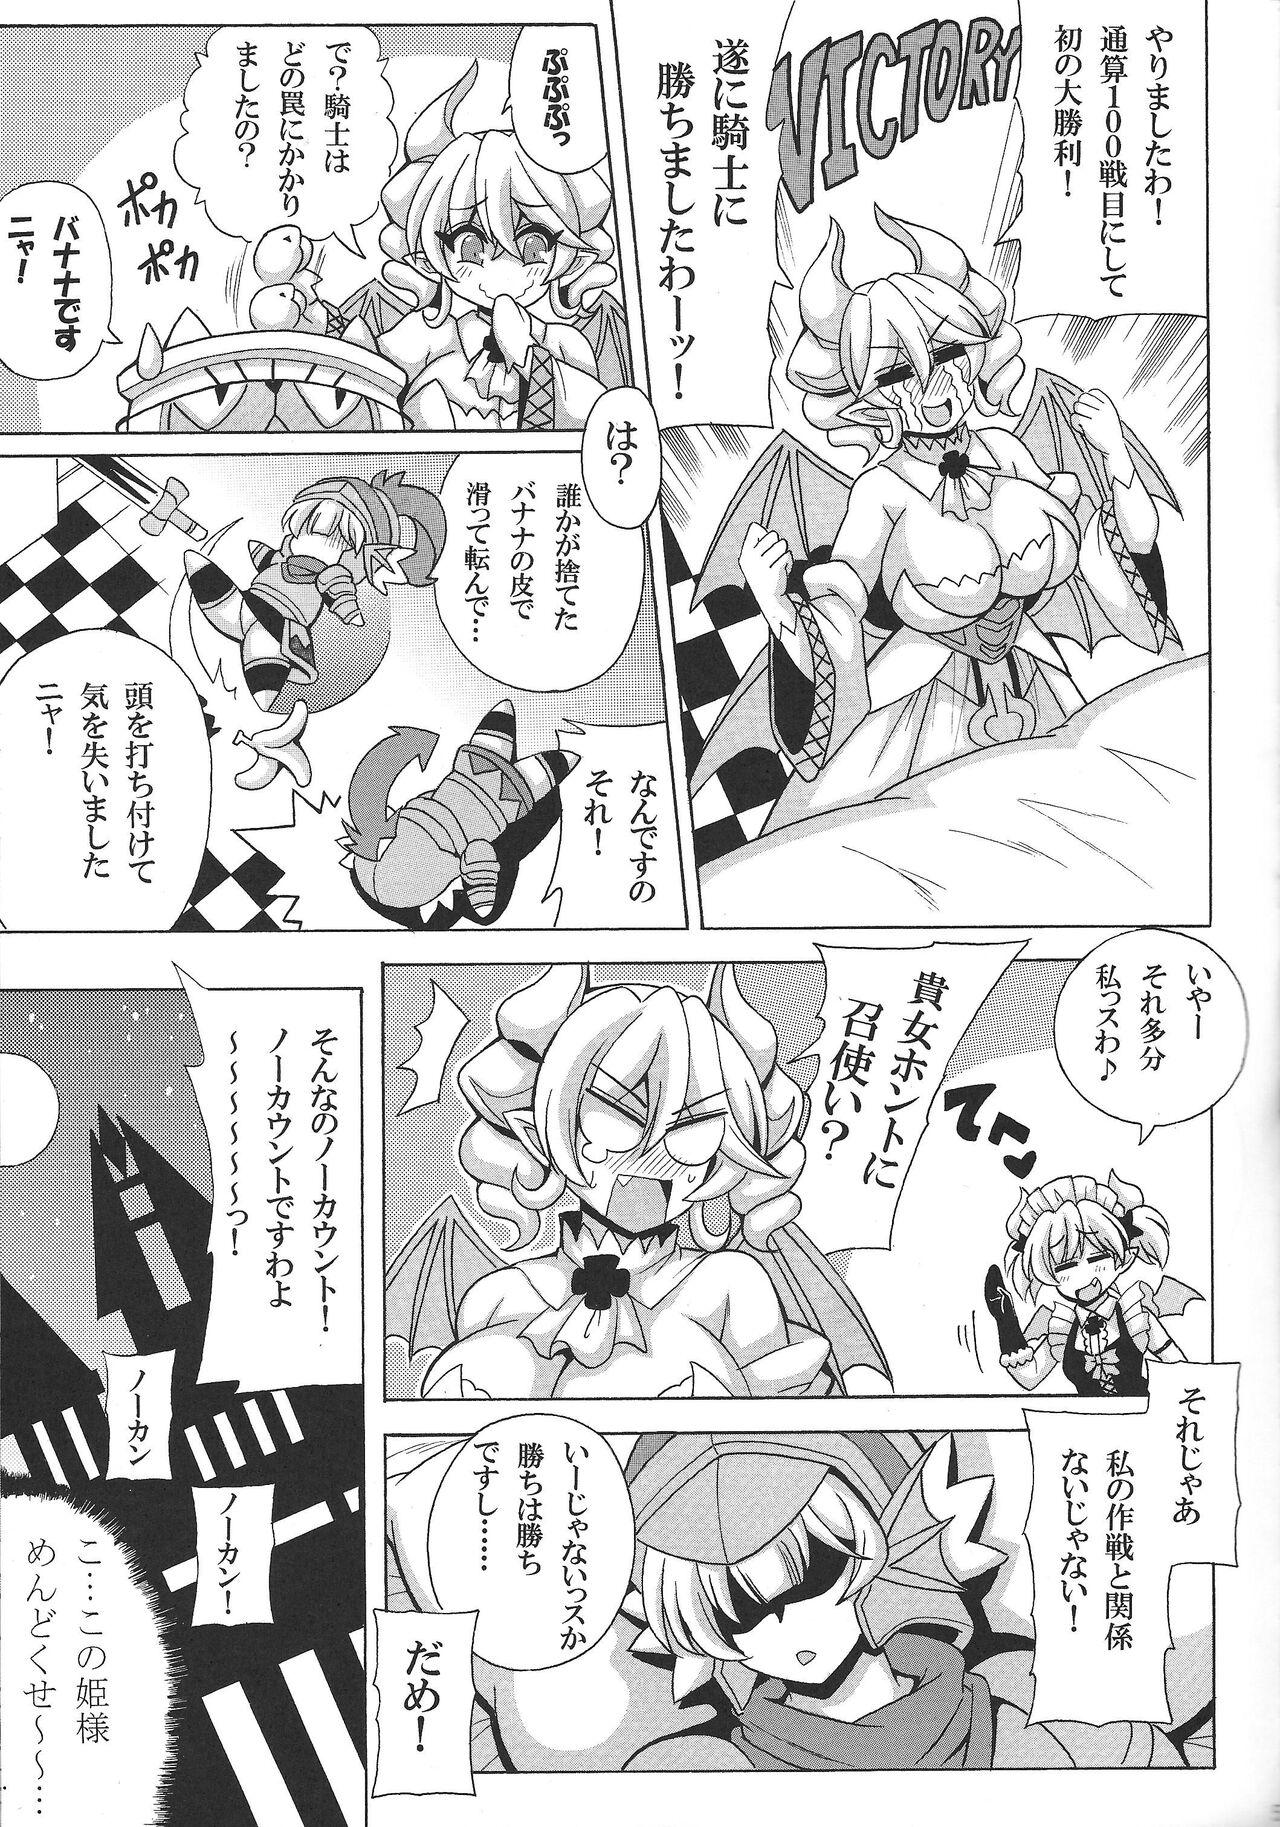 Cosplay LABRYNTH MILK - Yu-gi-oh Small Tits - Page 6